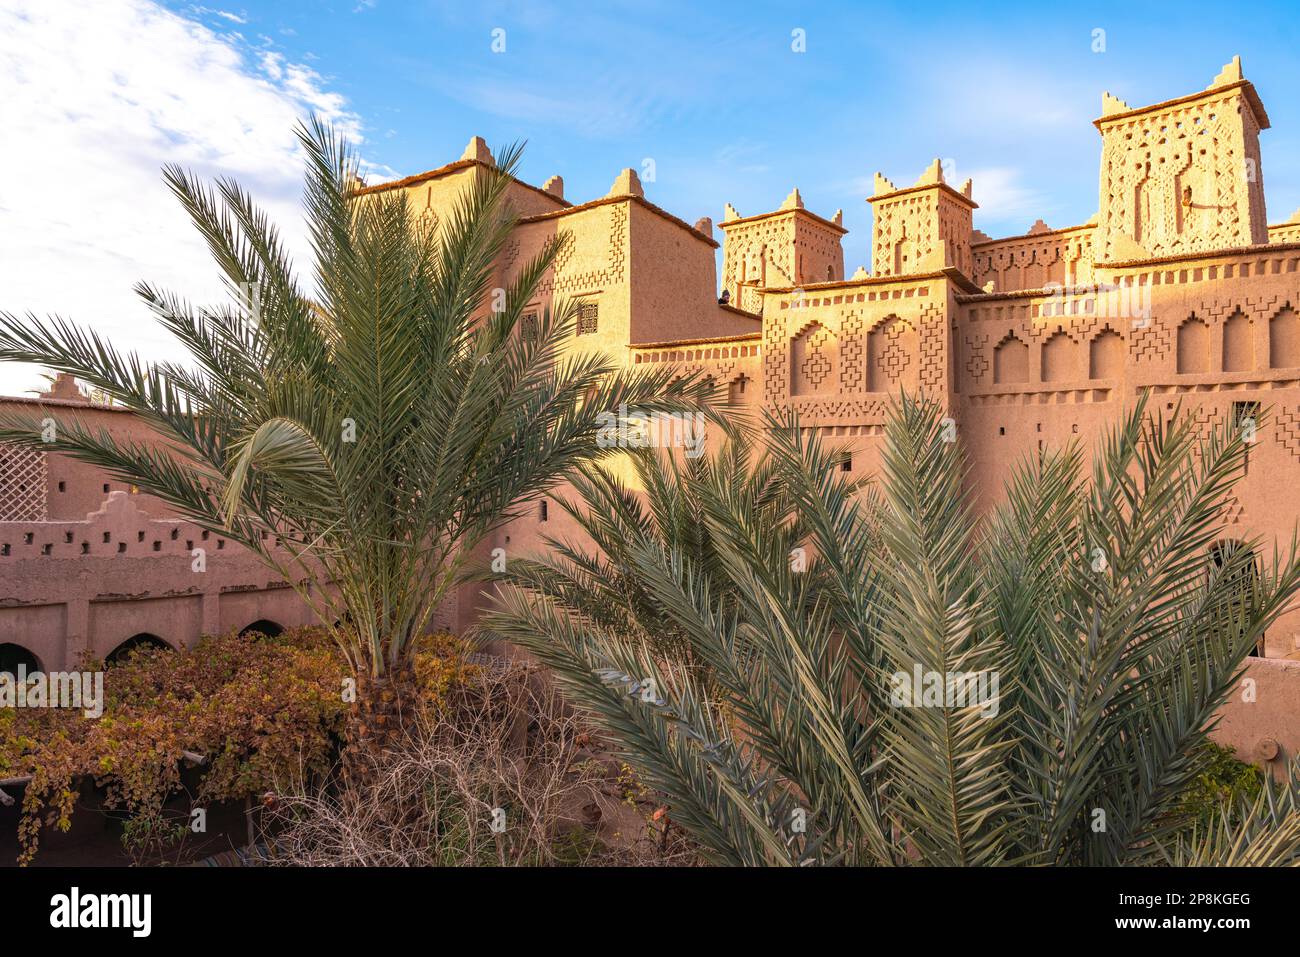 Amridil Kasbah in Morocco, sunny day Stock Photo